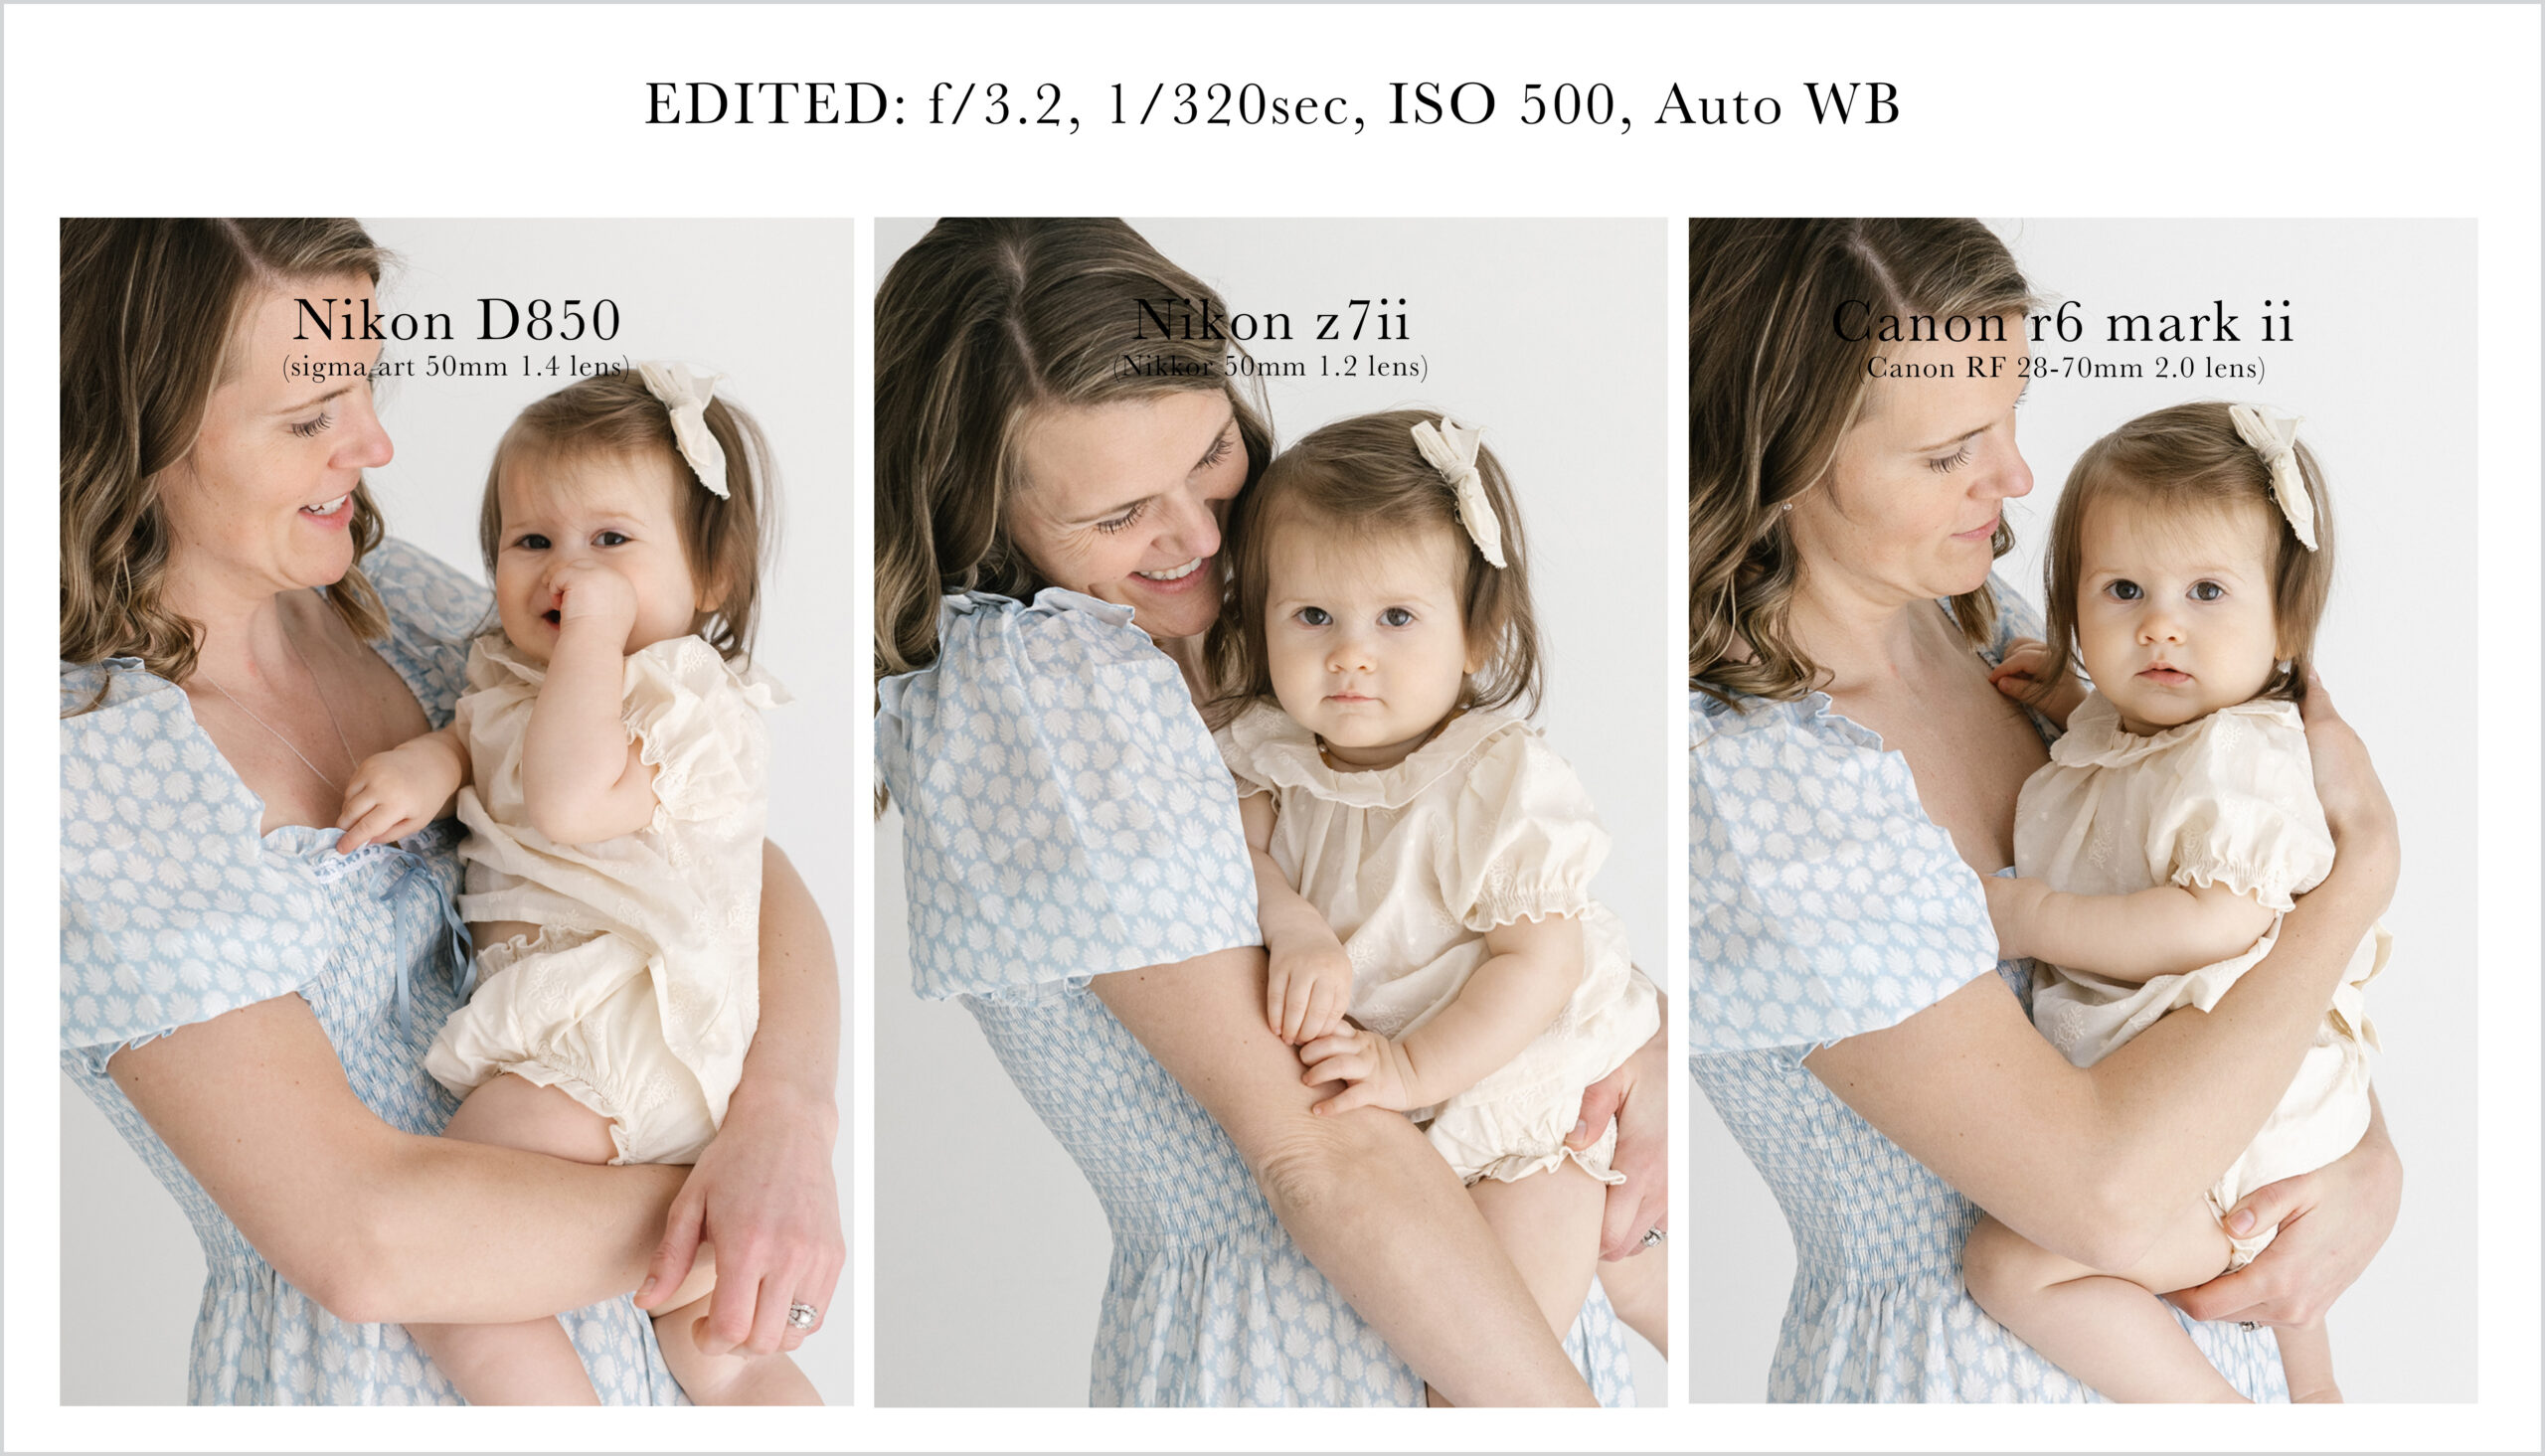 close up of mom holding baby for comparison photos with nikon d850, nikon z7ii and Canon r6 mark ii